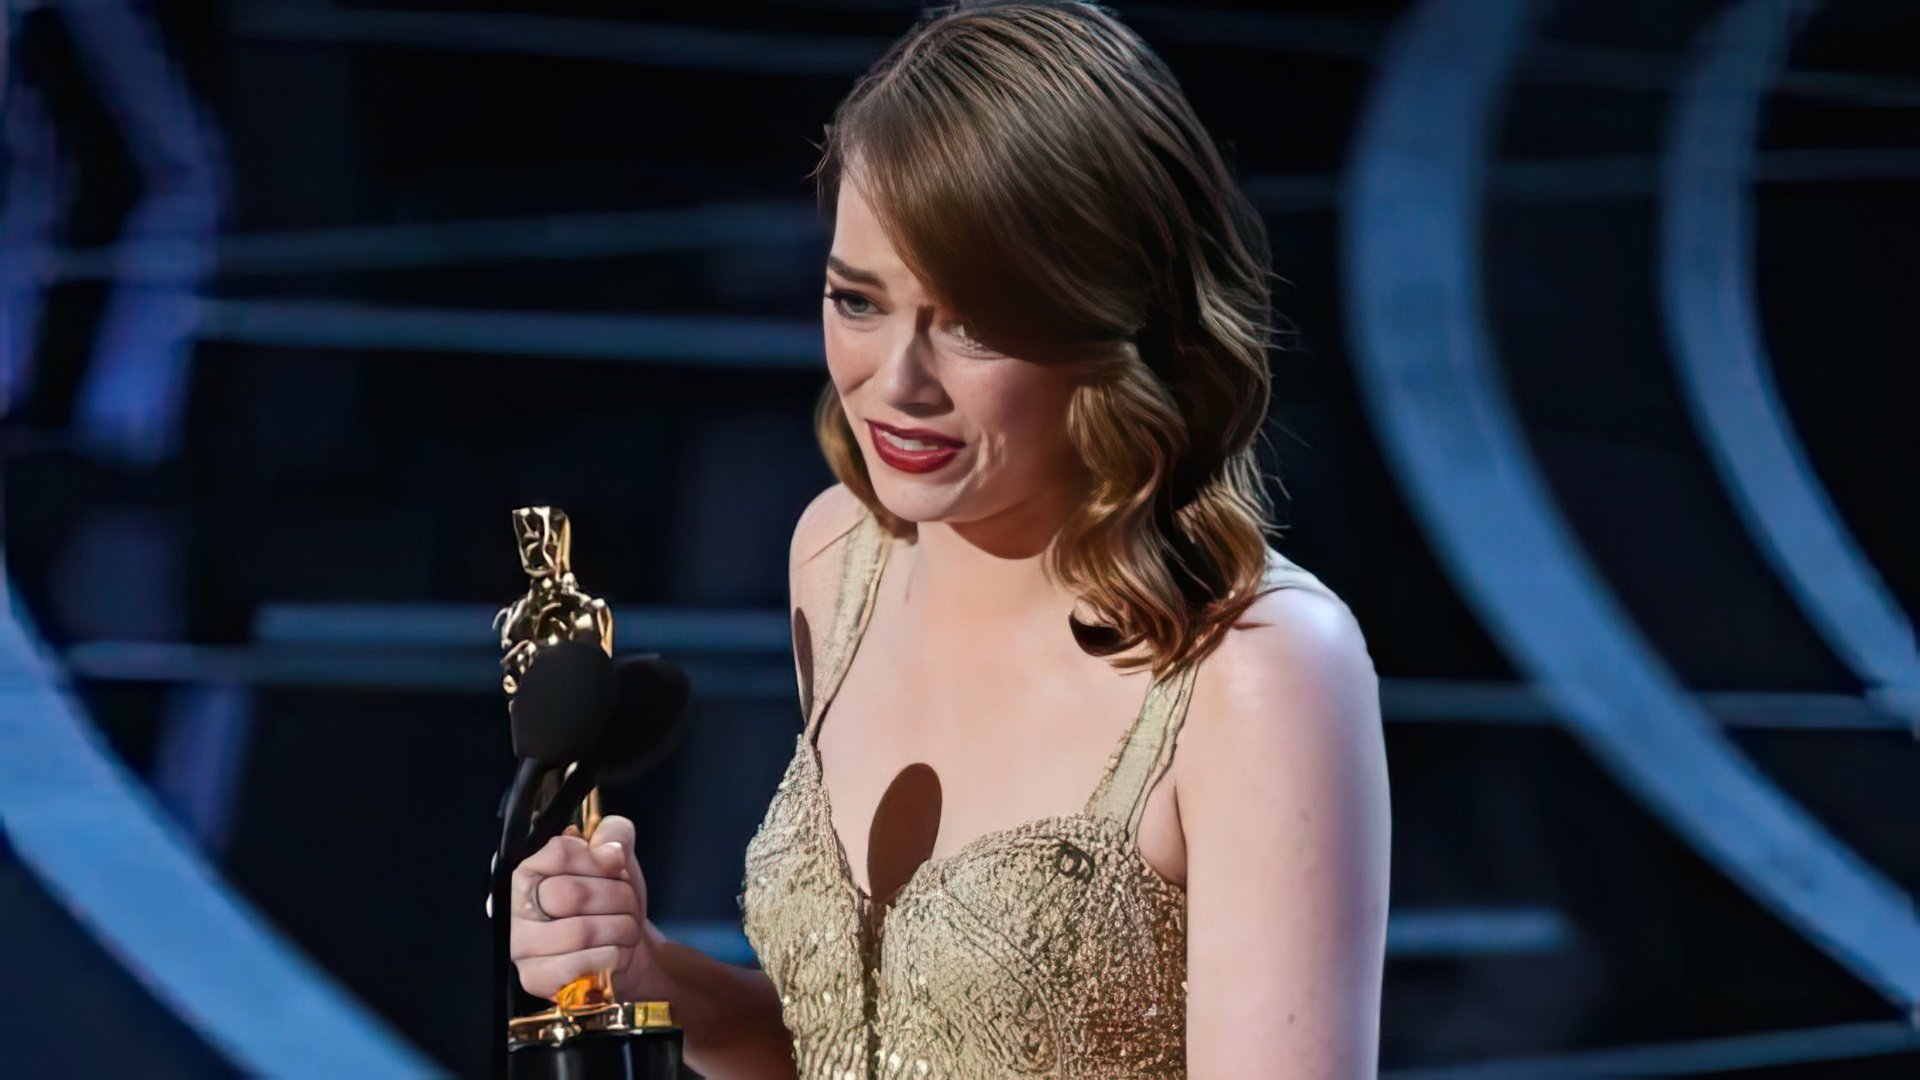 In 2017 Emma received an Academy Award for Best Actress for her role in “La La Land”